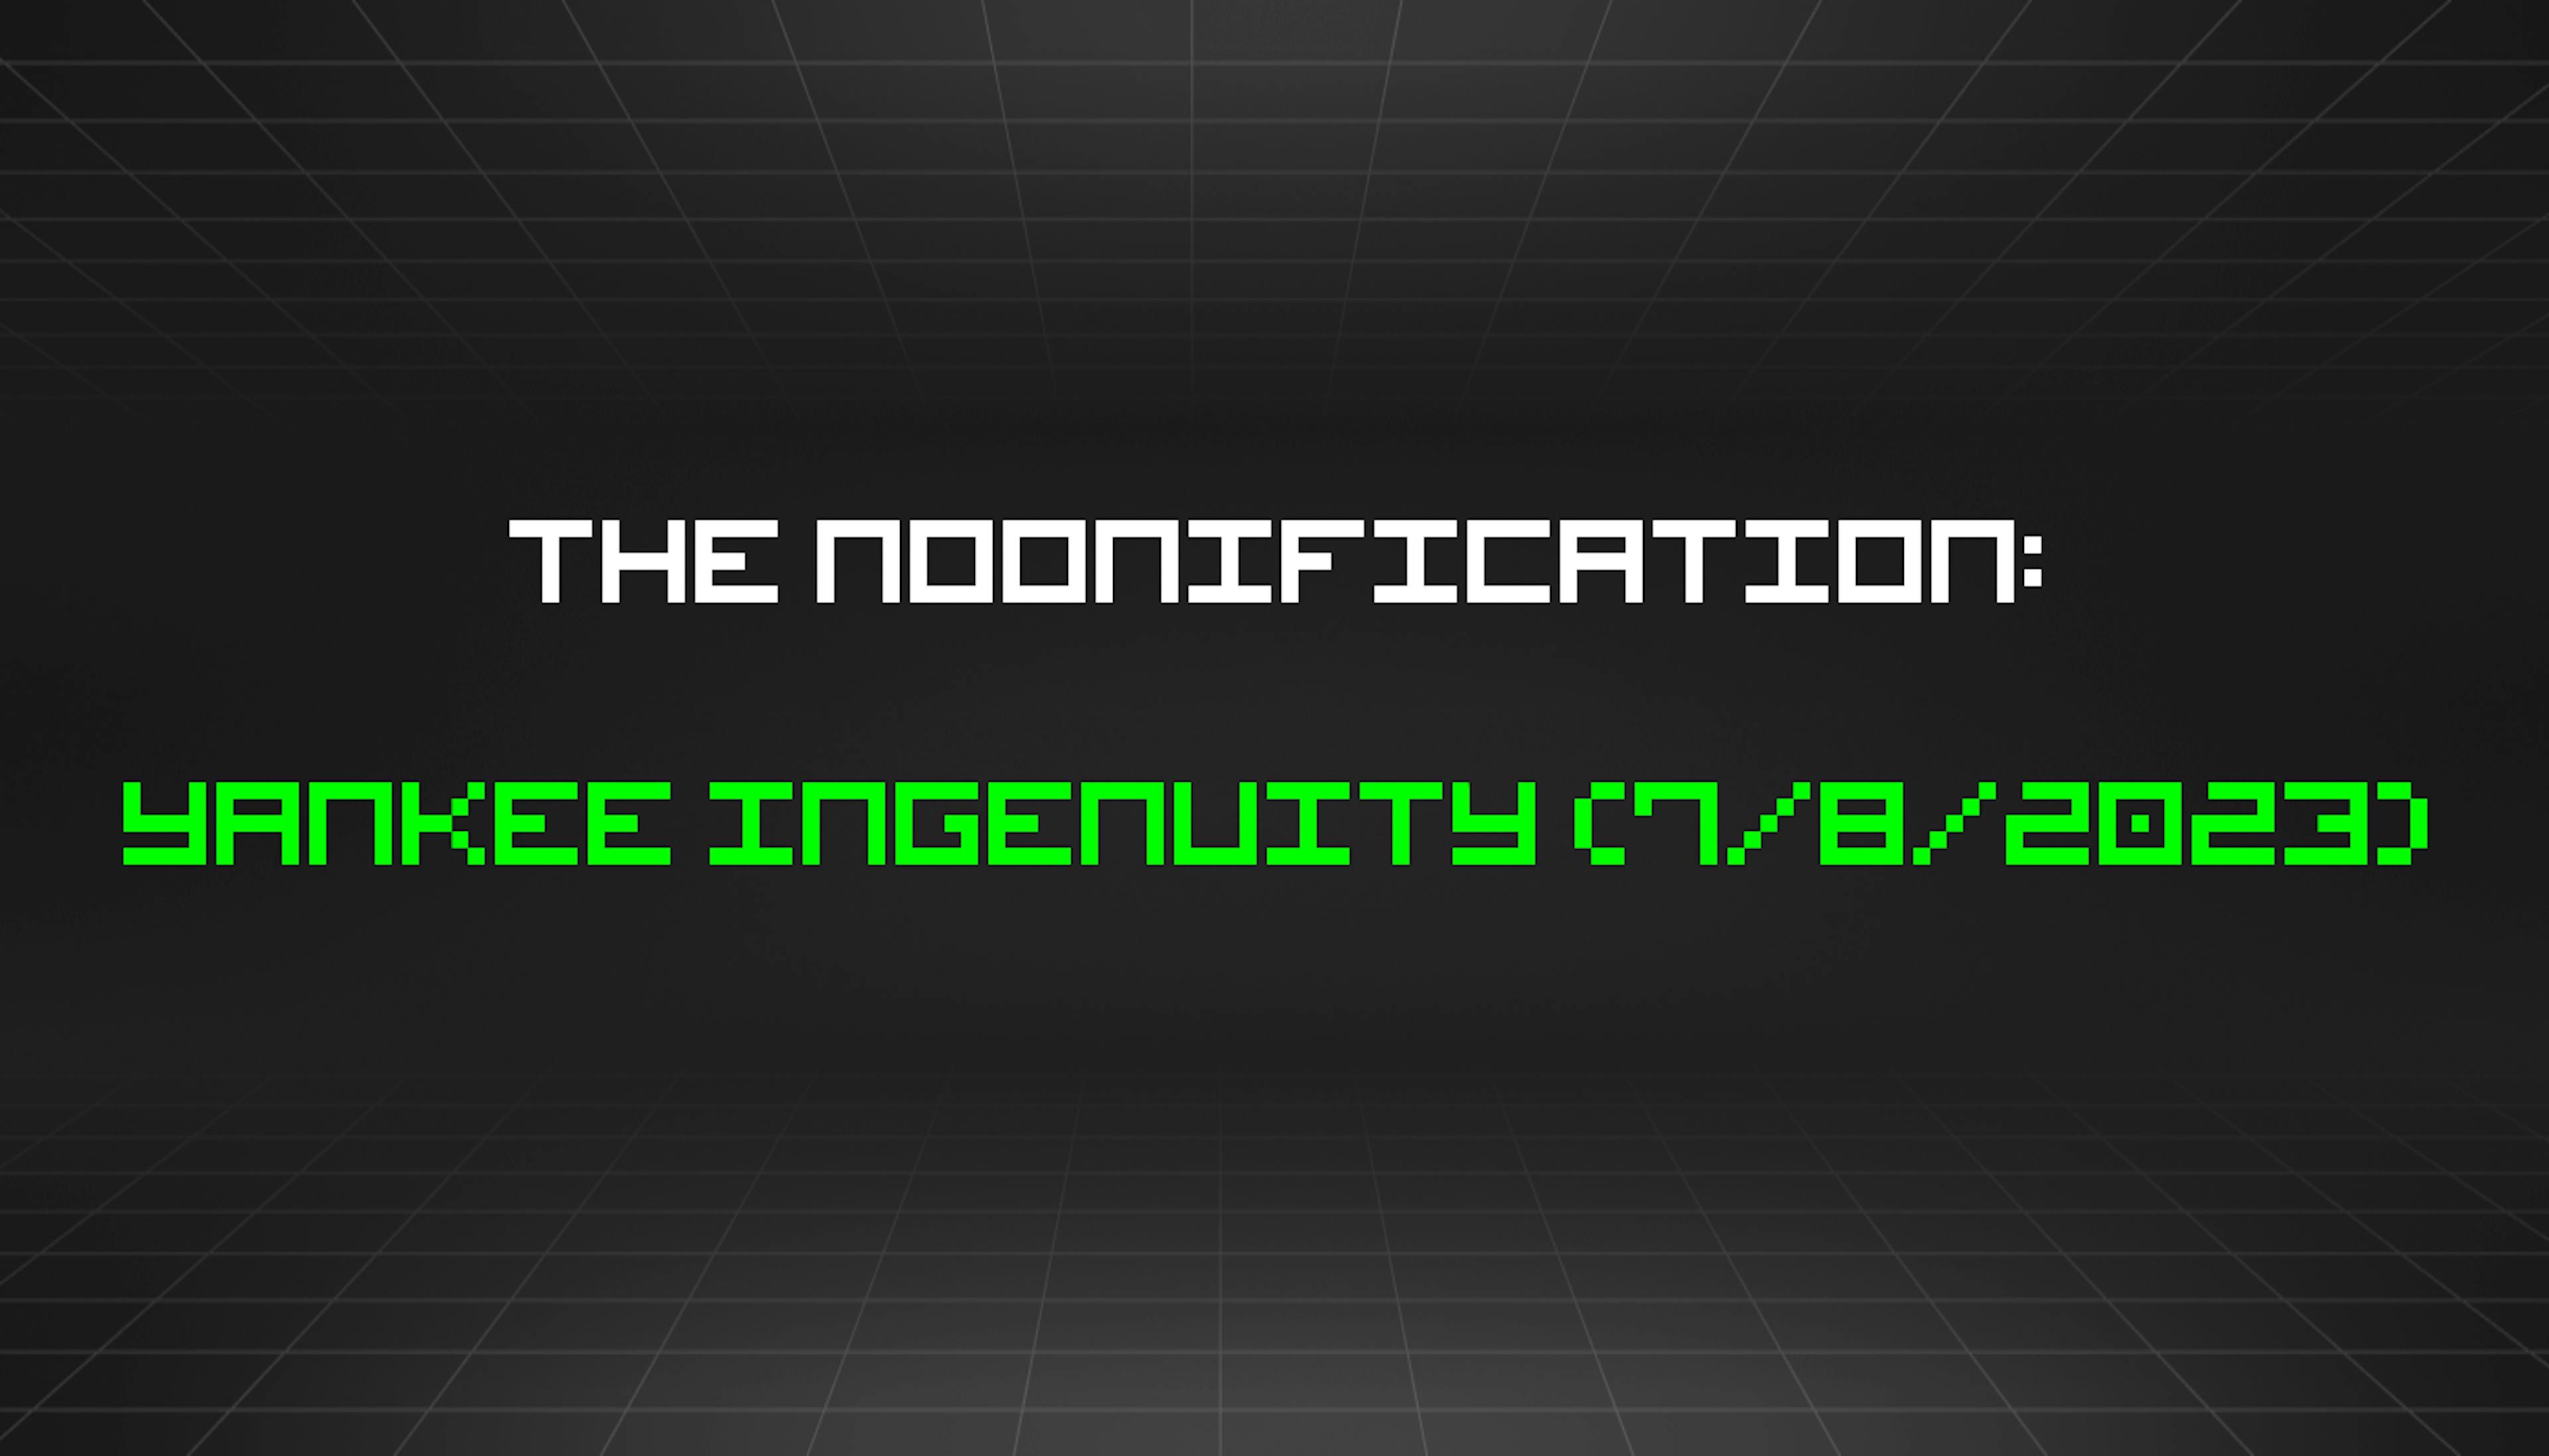 /7-8-2023-noonification feature image